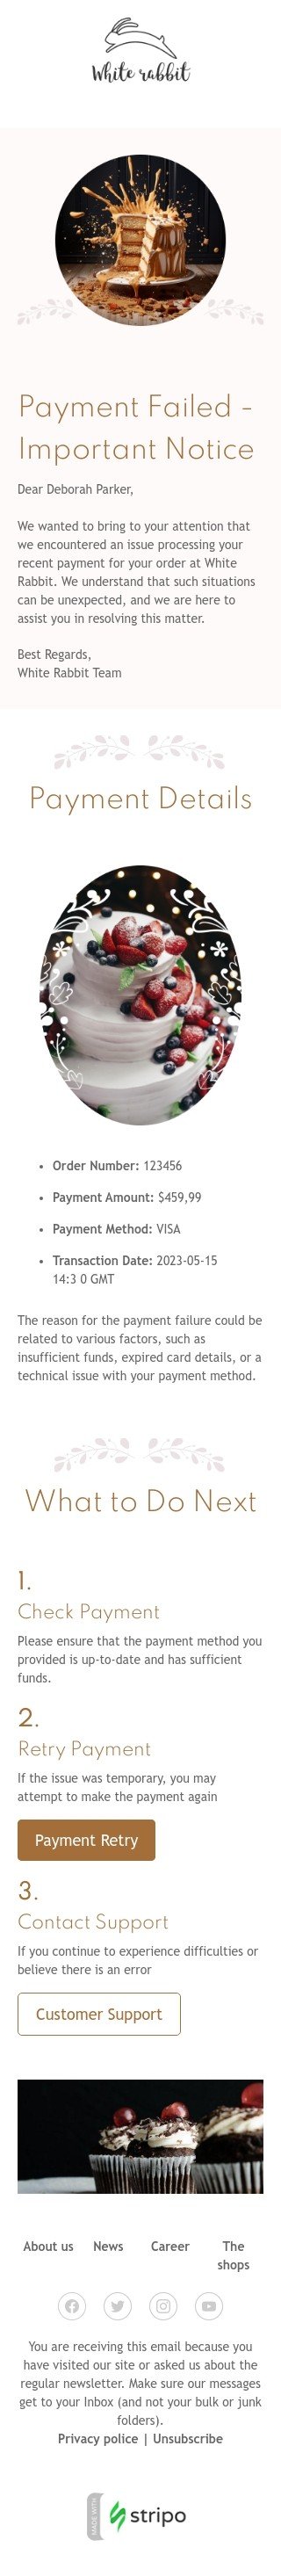 Order confirmation email template "Payment failed" for baking industry mobile view